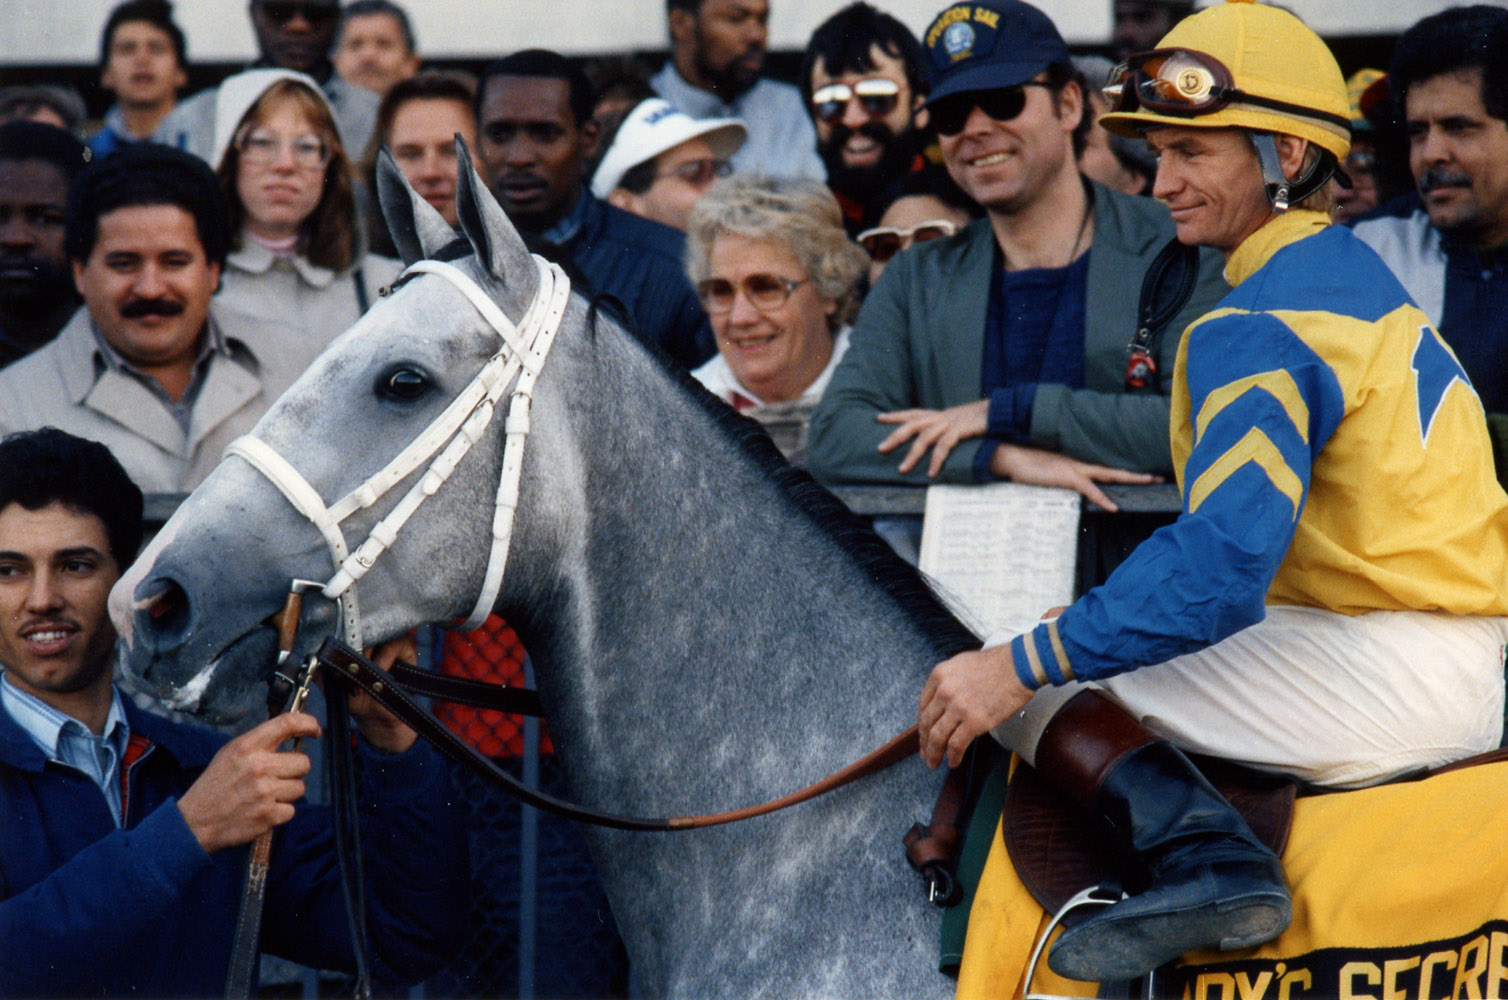 Pat Day and Lady's Secret in the winner's circle at Belmont Park in 1986 for Lady's Secret Day (Barbara D. Livingston/Museum Collection)